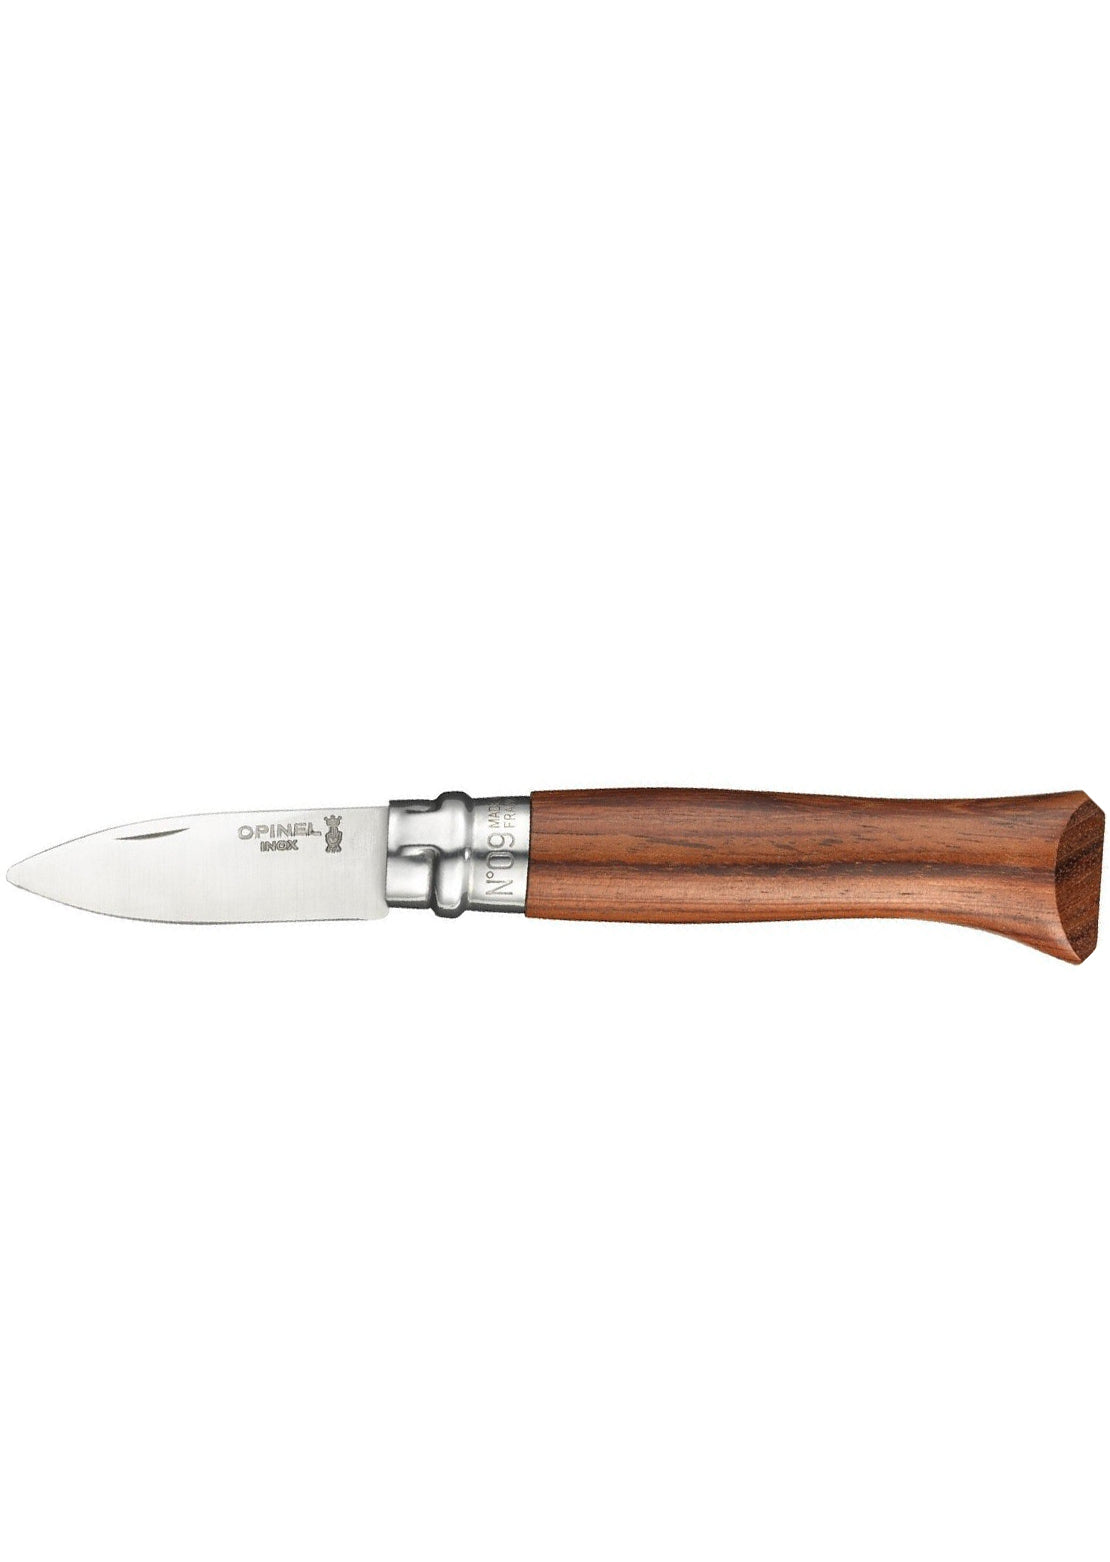 Opinel Tradition N°09 Gourmets Oyster and Shellfish Knife Paduk Wood